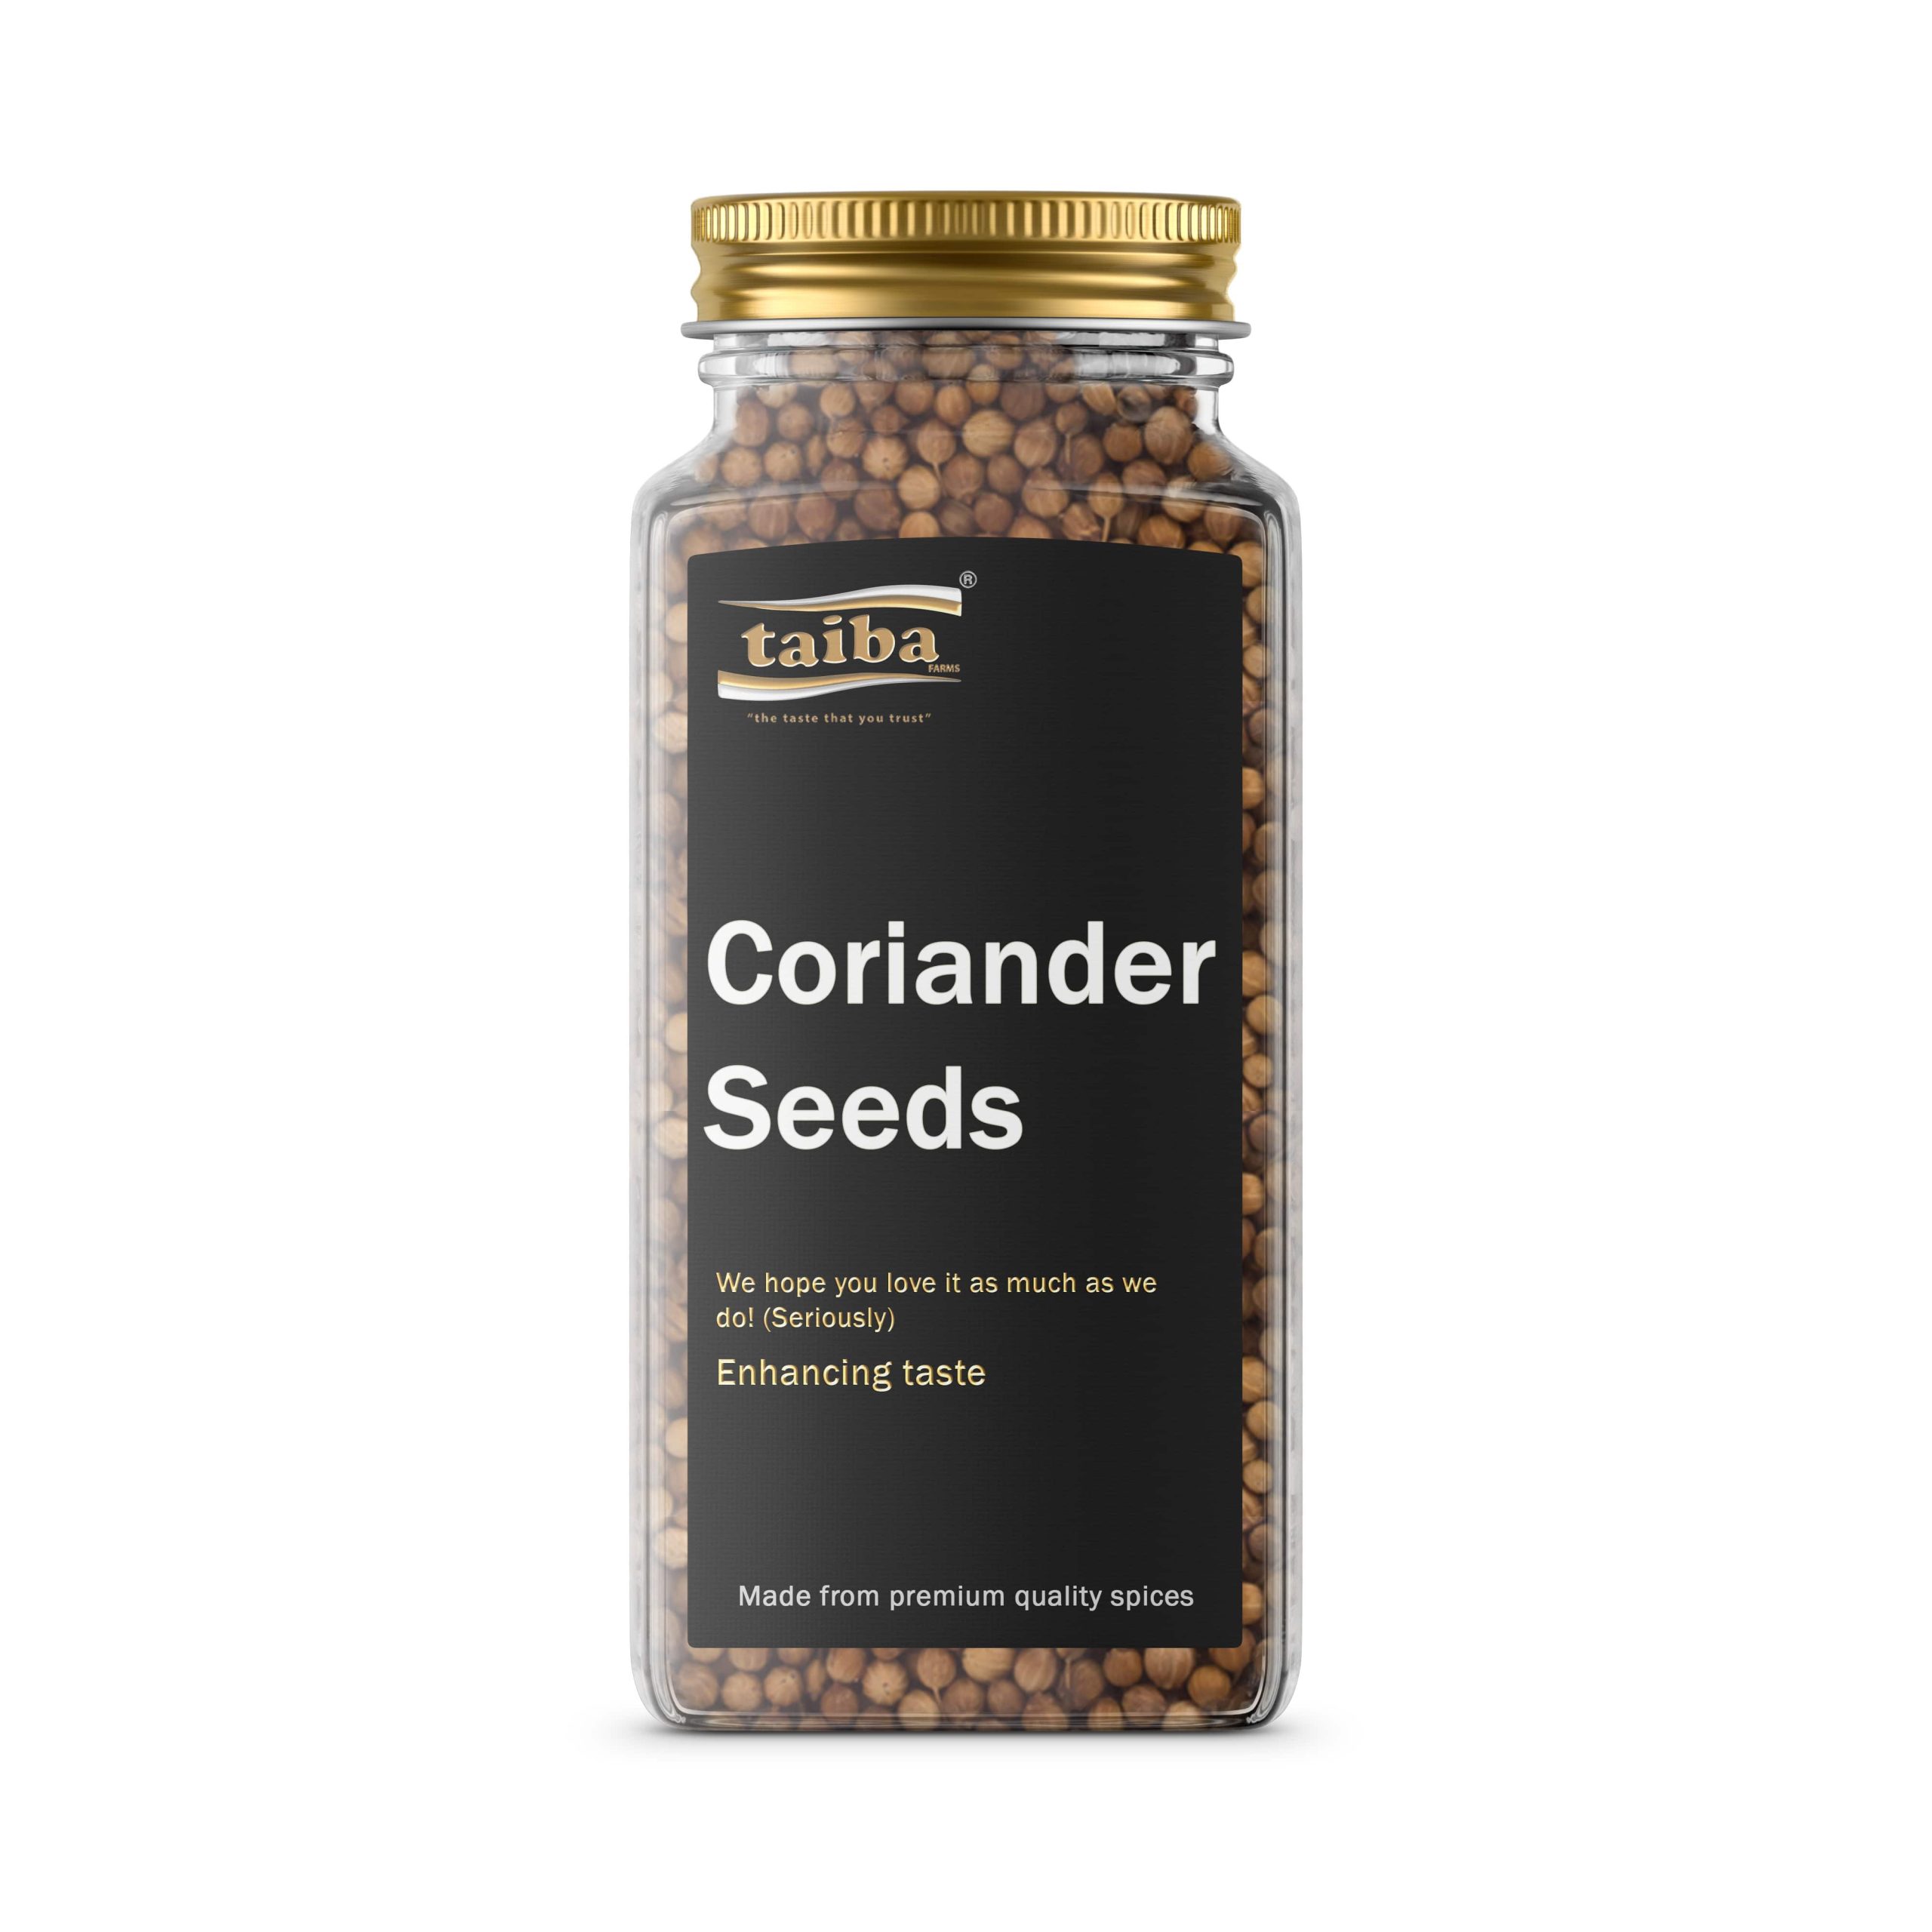 coriander-online-grocery-hearps-and-spices-online-home-delivery-import-and-export-online-companies-spices-suppliers-in-brazil-UAE